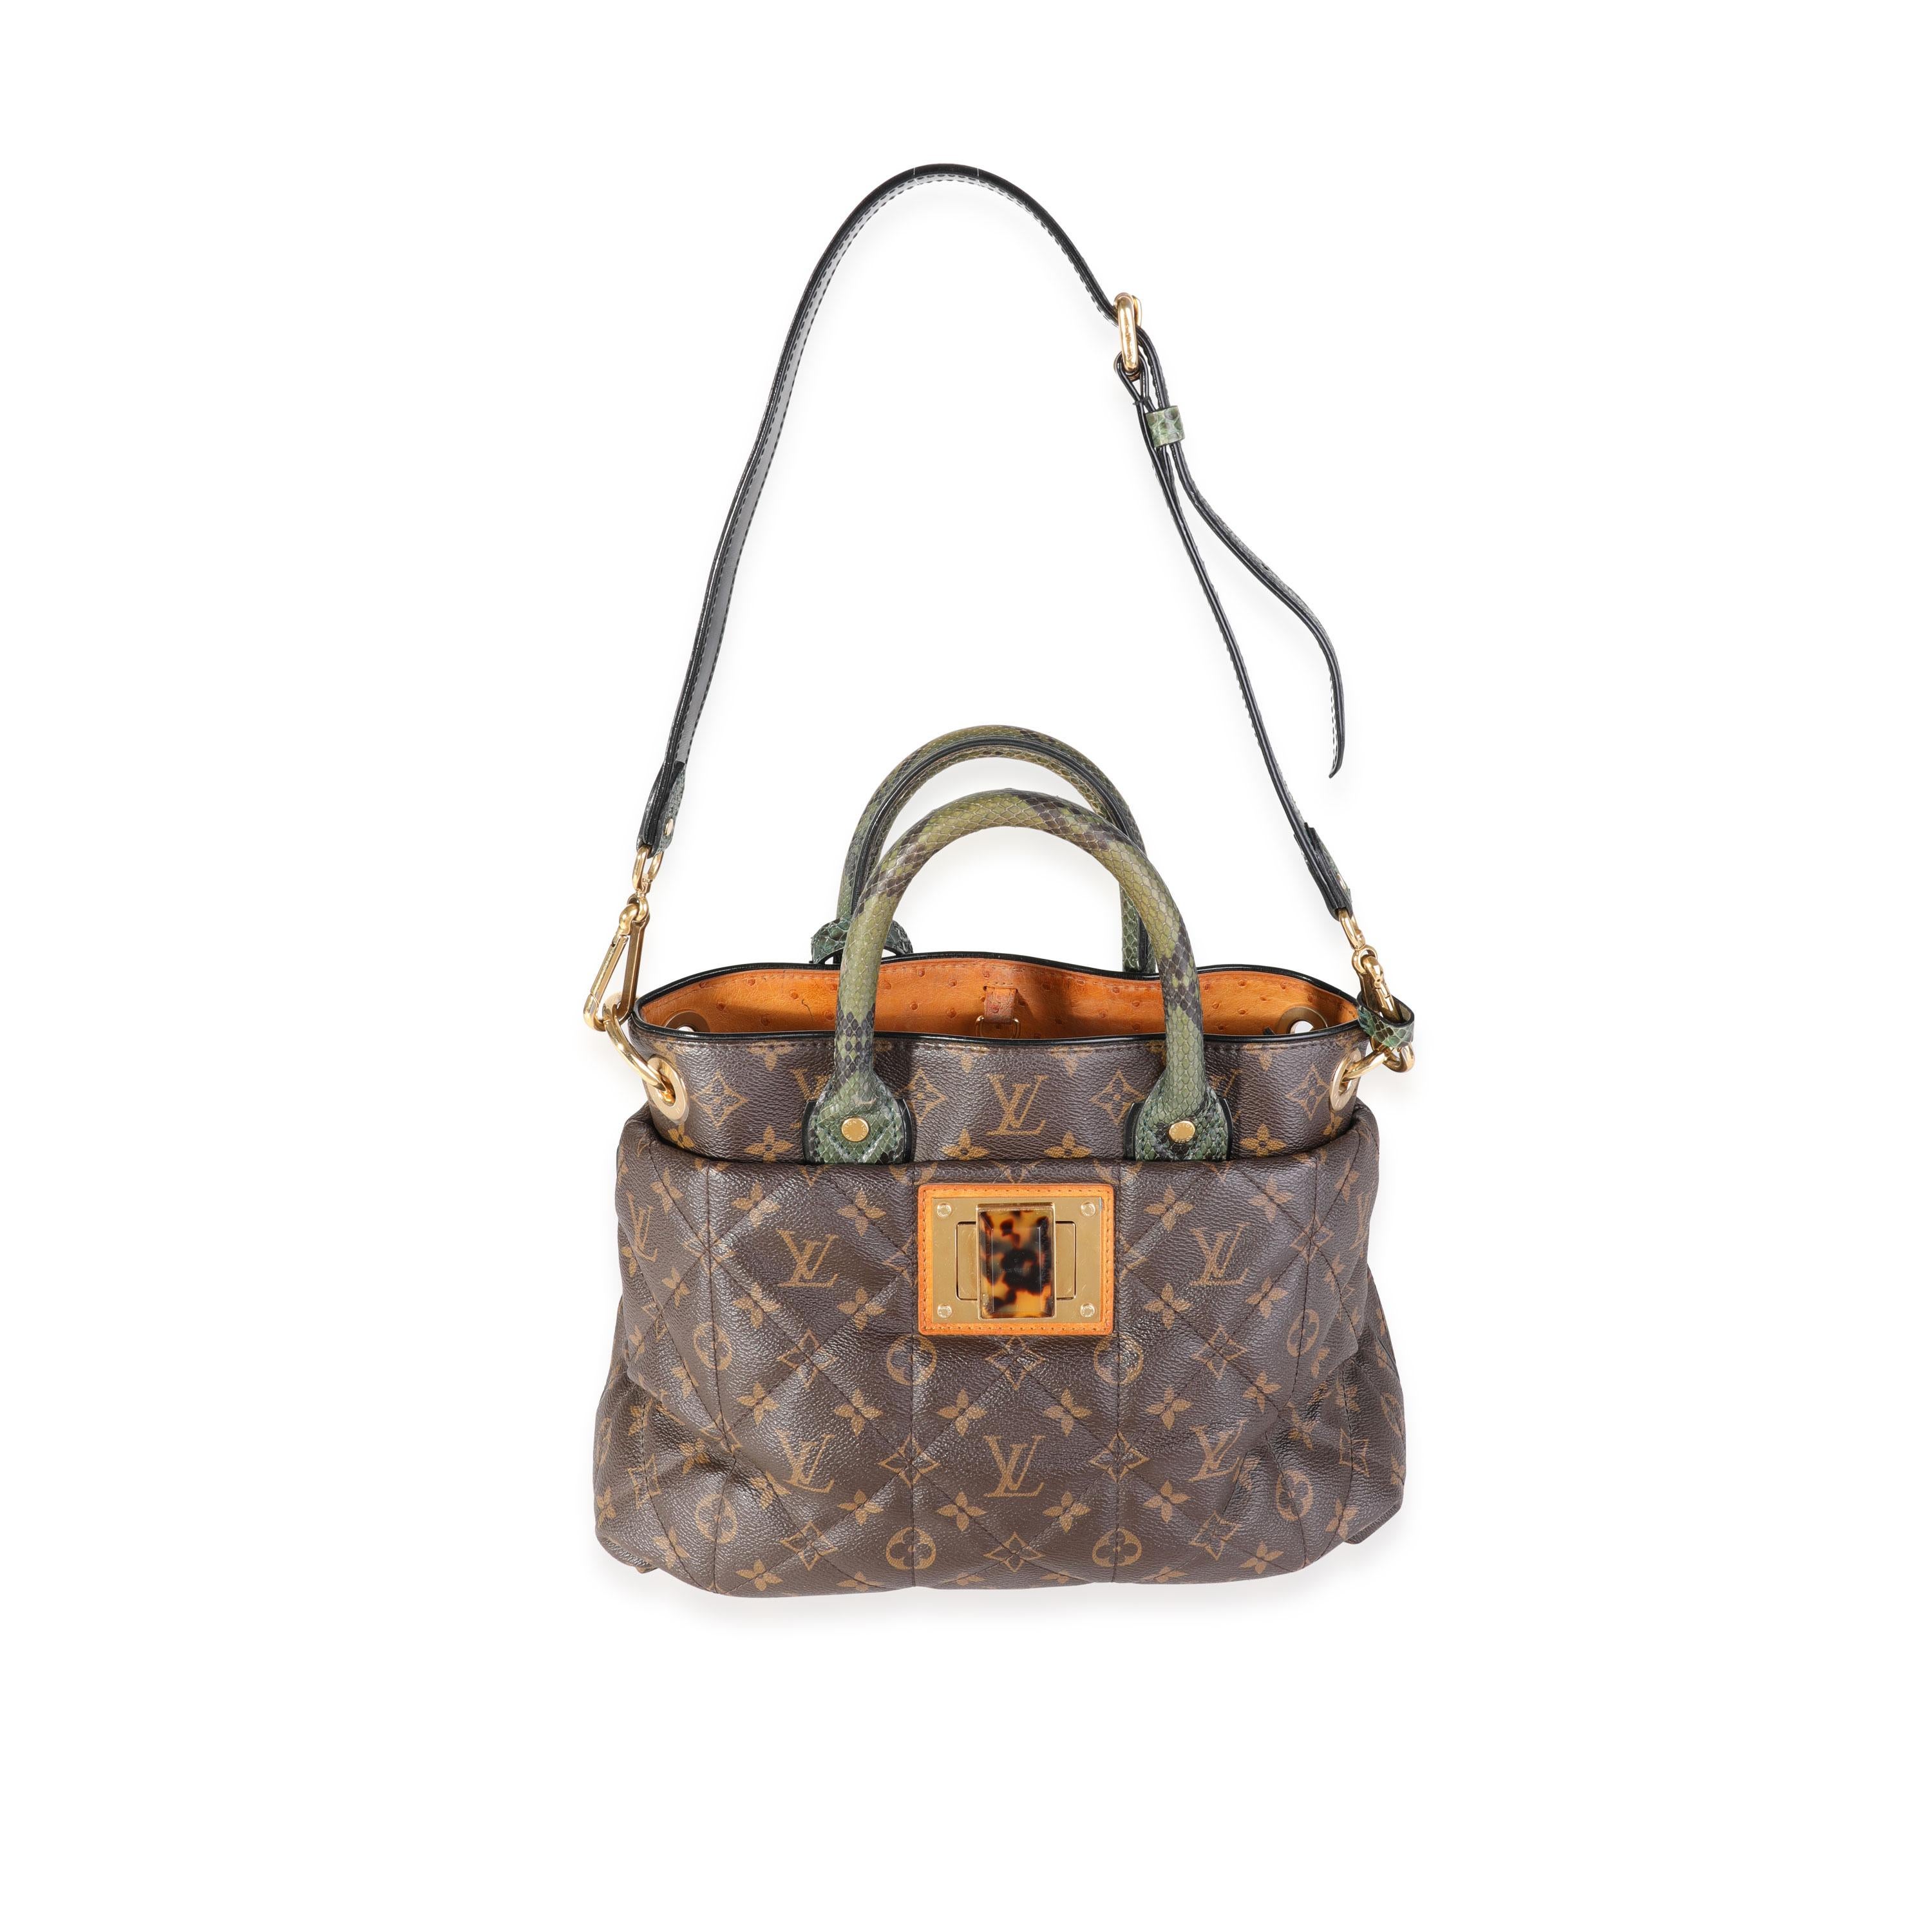 Listing Title: Louis Vuitton Monogram Canvas & Python Etoile Exotique Bag
SKU: 118913
MSRP: 7600.00
Condition: Pre-owned (3000)
Handbag Condition: Very Good
Condition Comments: Handles are discoloring. Wear to corners. Interior stains.
Brand: Louis